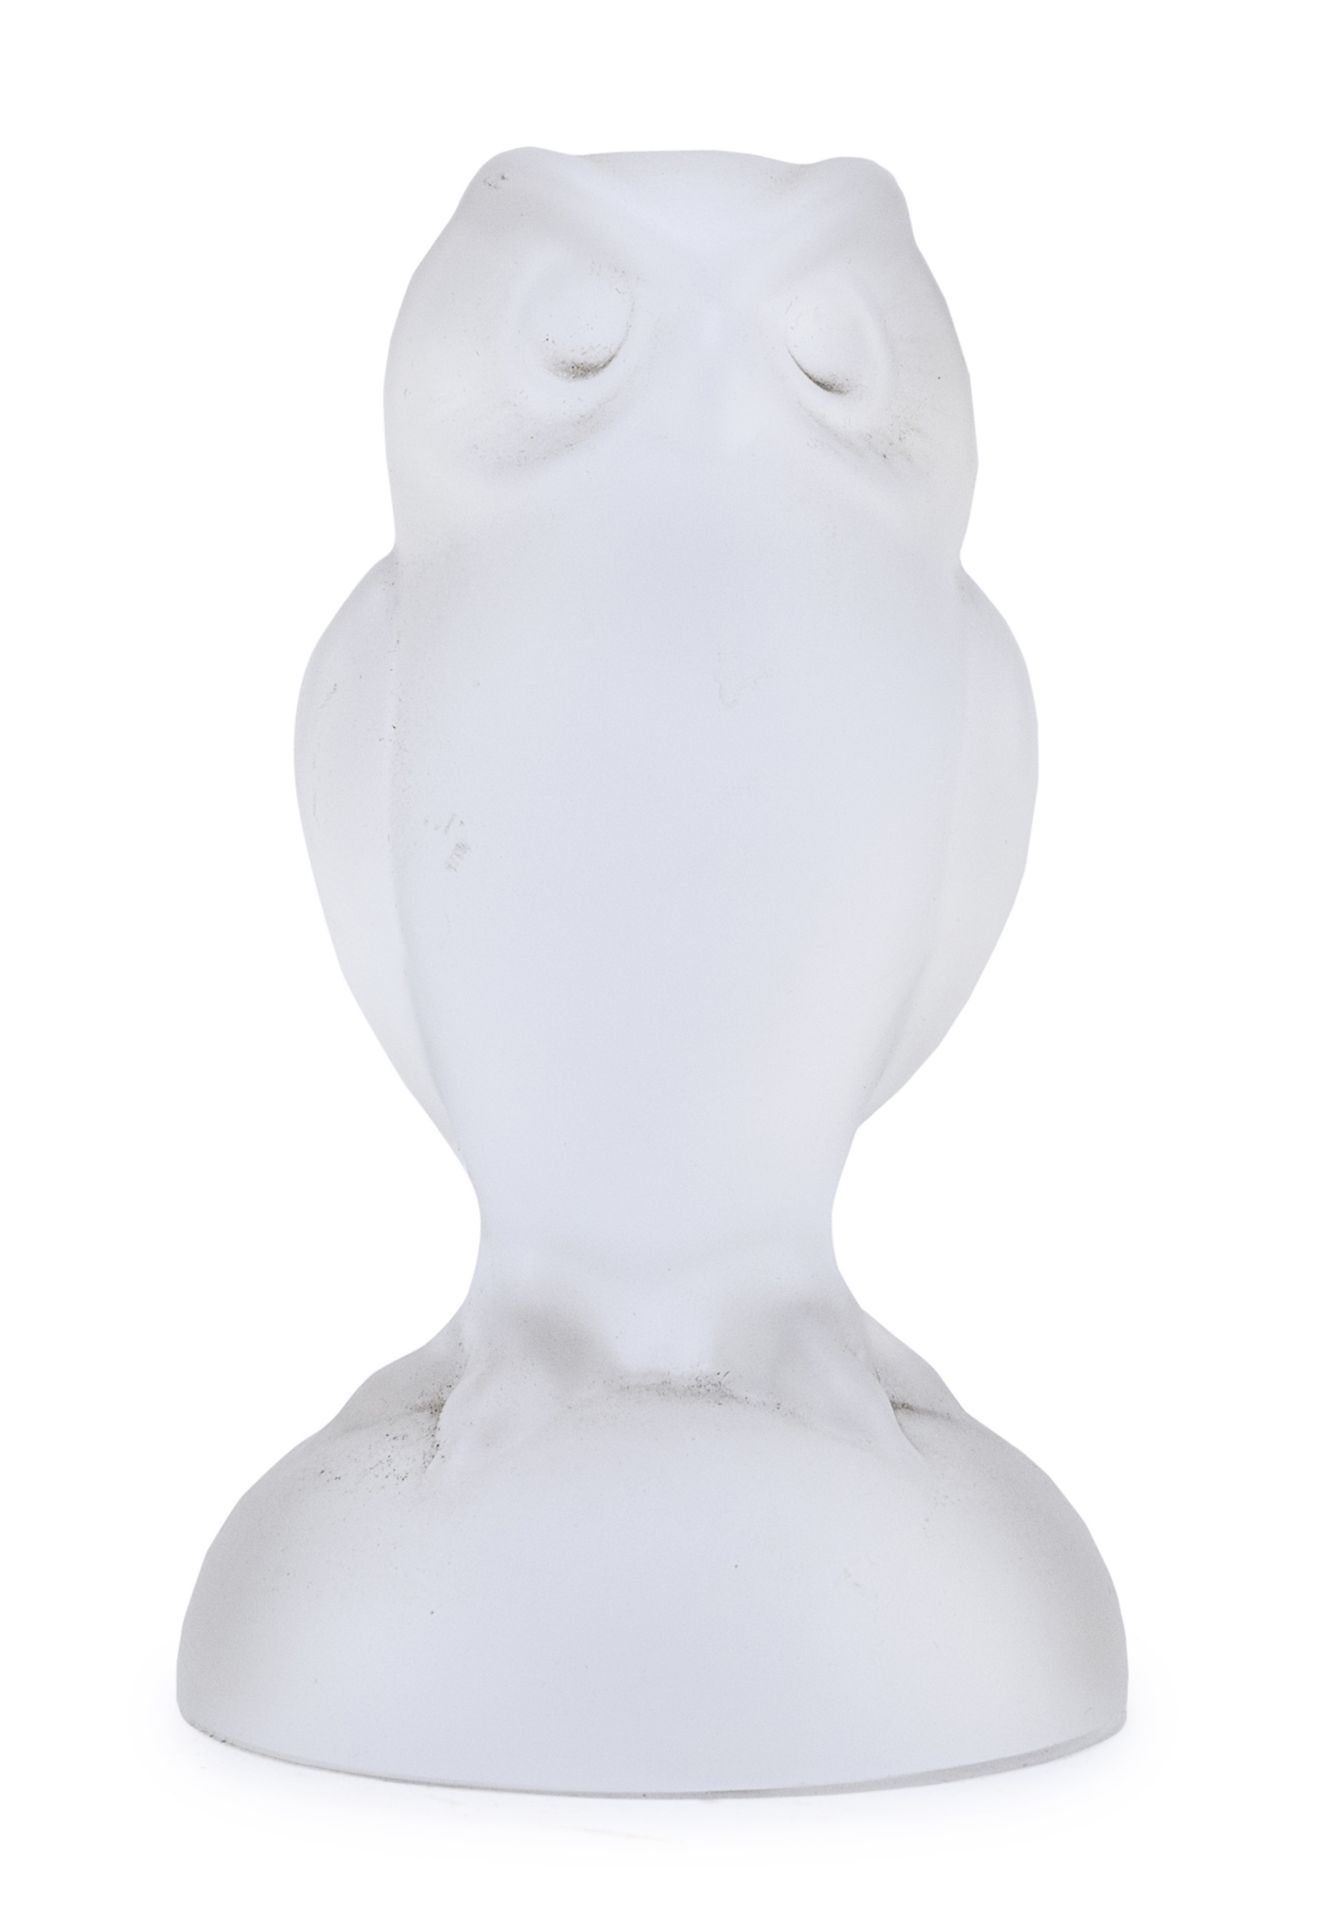 OWL SCULPTURE IN GLASS BRAND SEVRES FRANCE 80'S